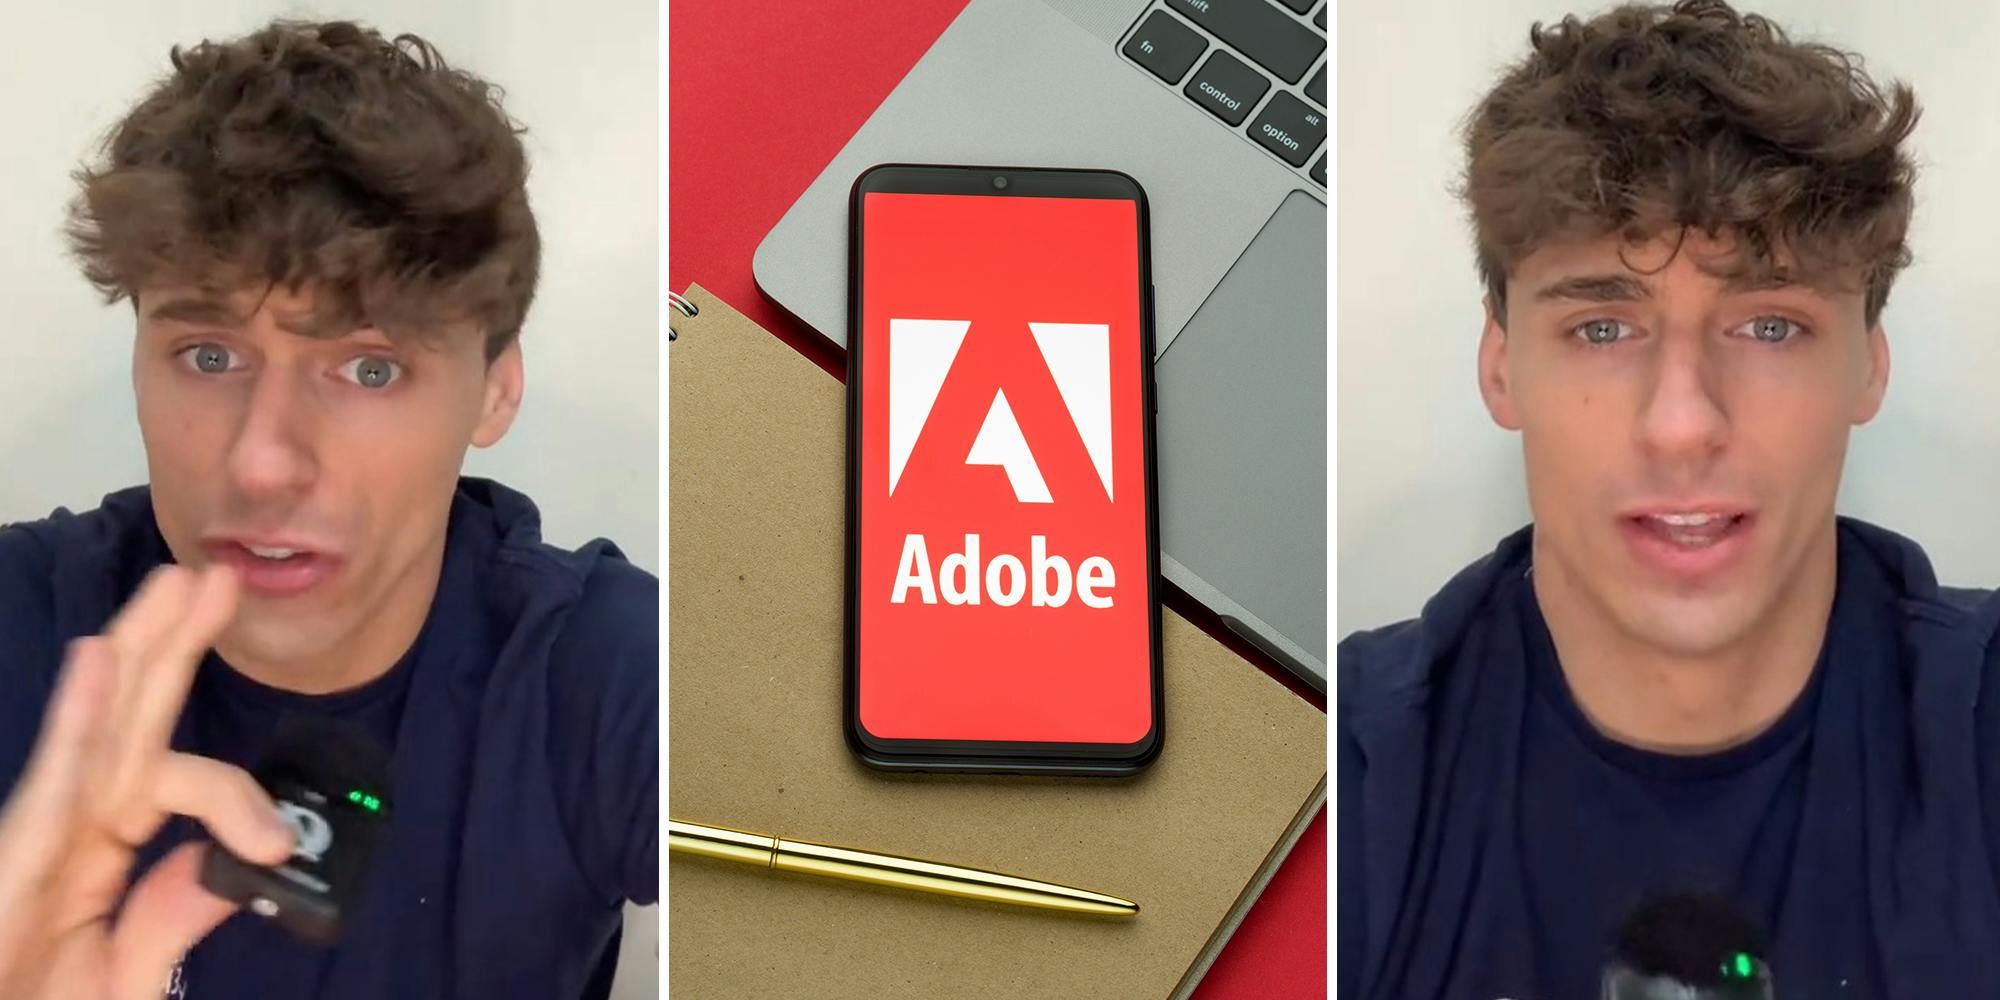 ‘They’re trying to trick you’: Creator says Adobe ‘hid’ controversial clause from its customers. He shares what to do instead